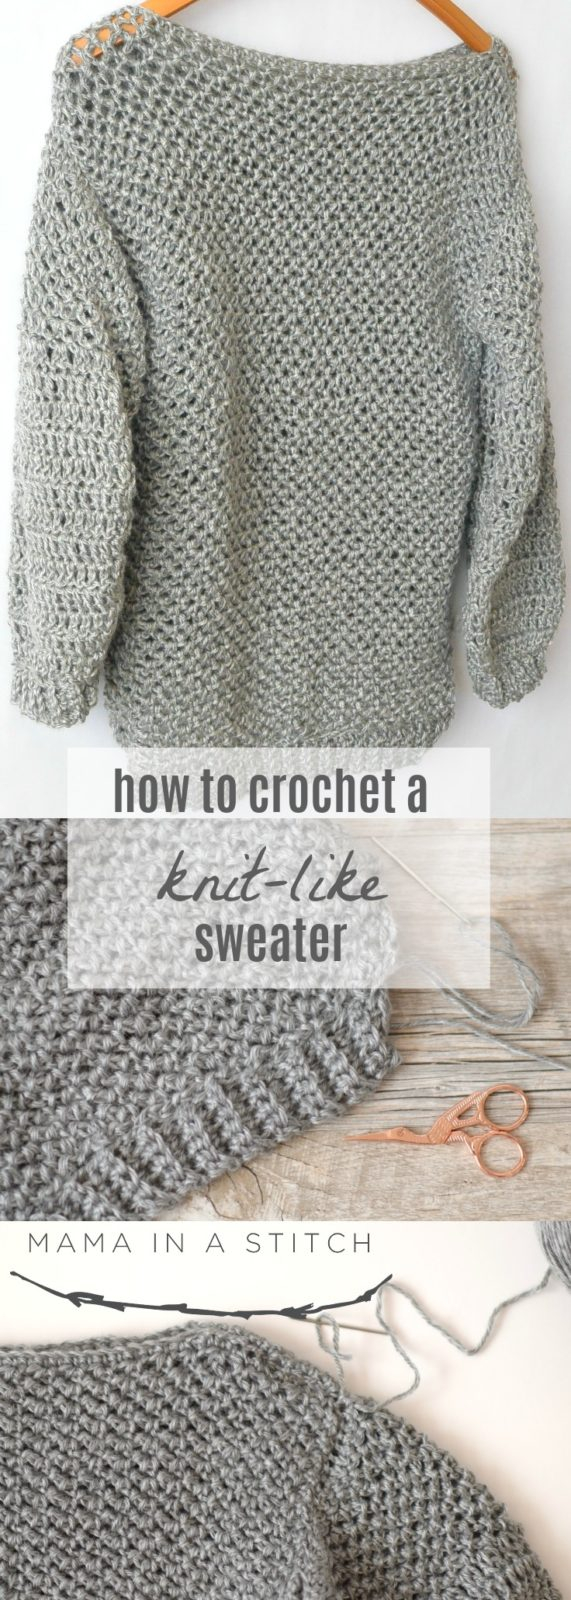 Easy Crochet Pullover Pattern How To Make An Easy Crocheted Sweater Knit Like Mama In A Stitch